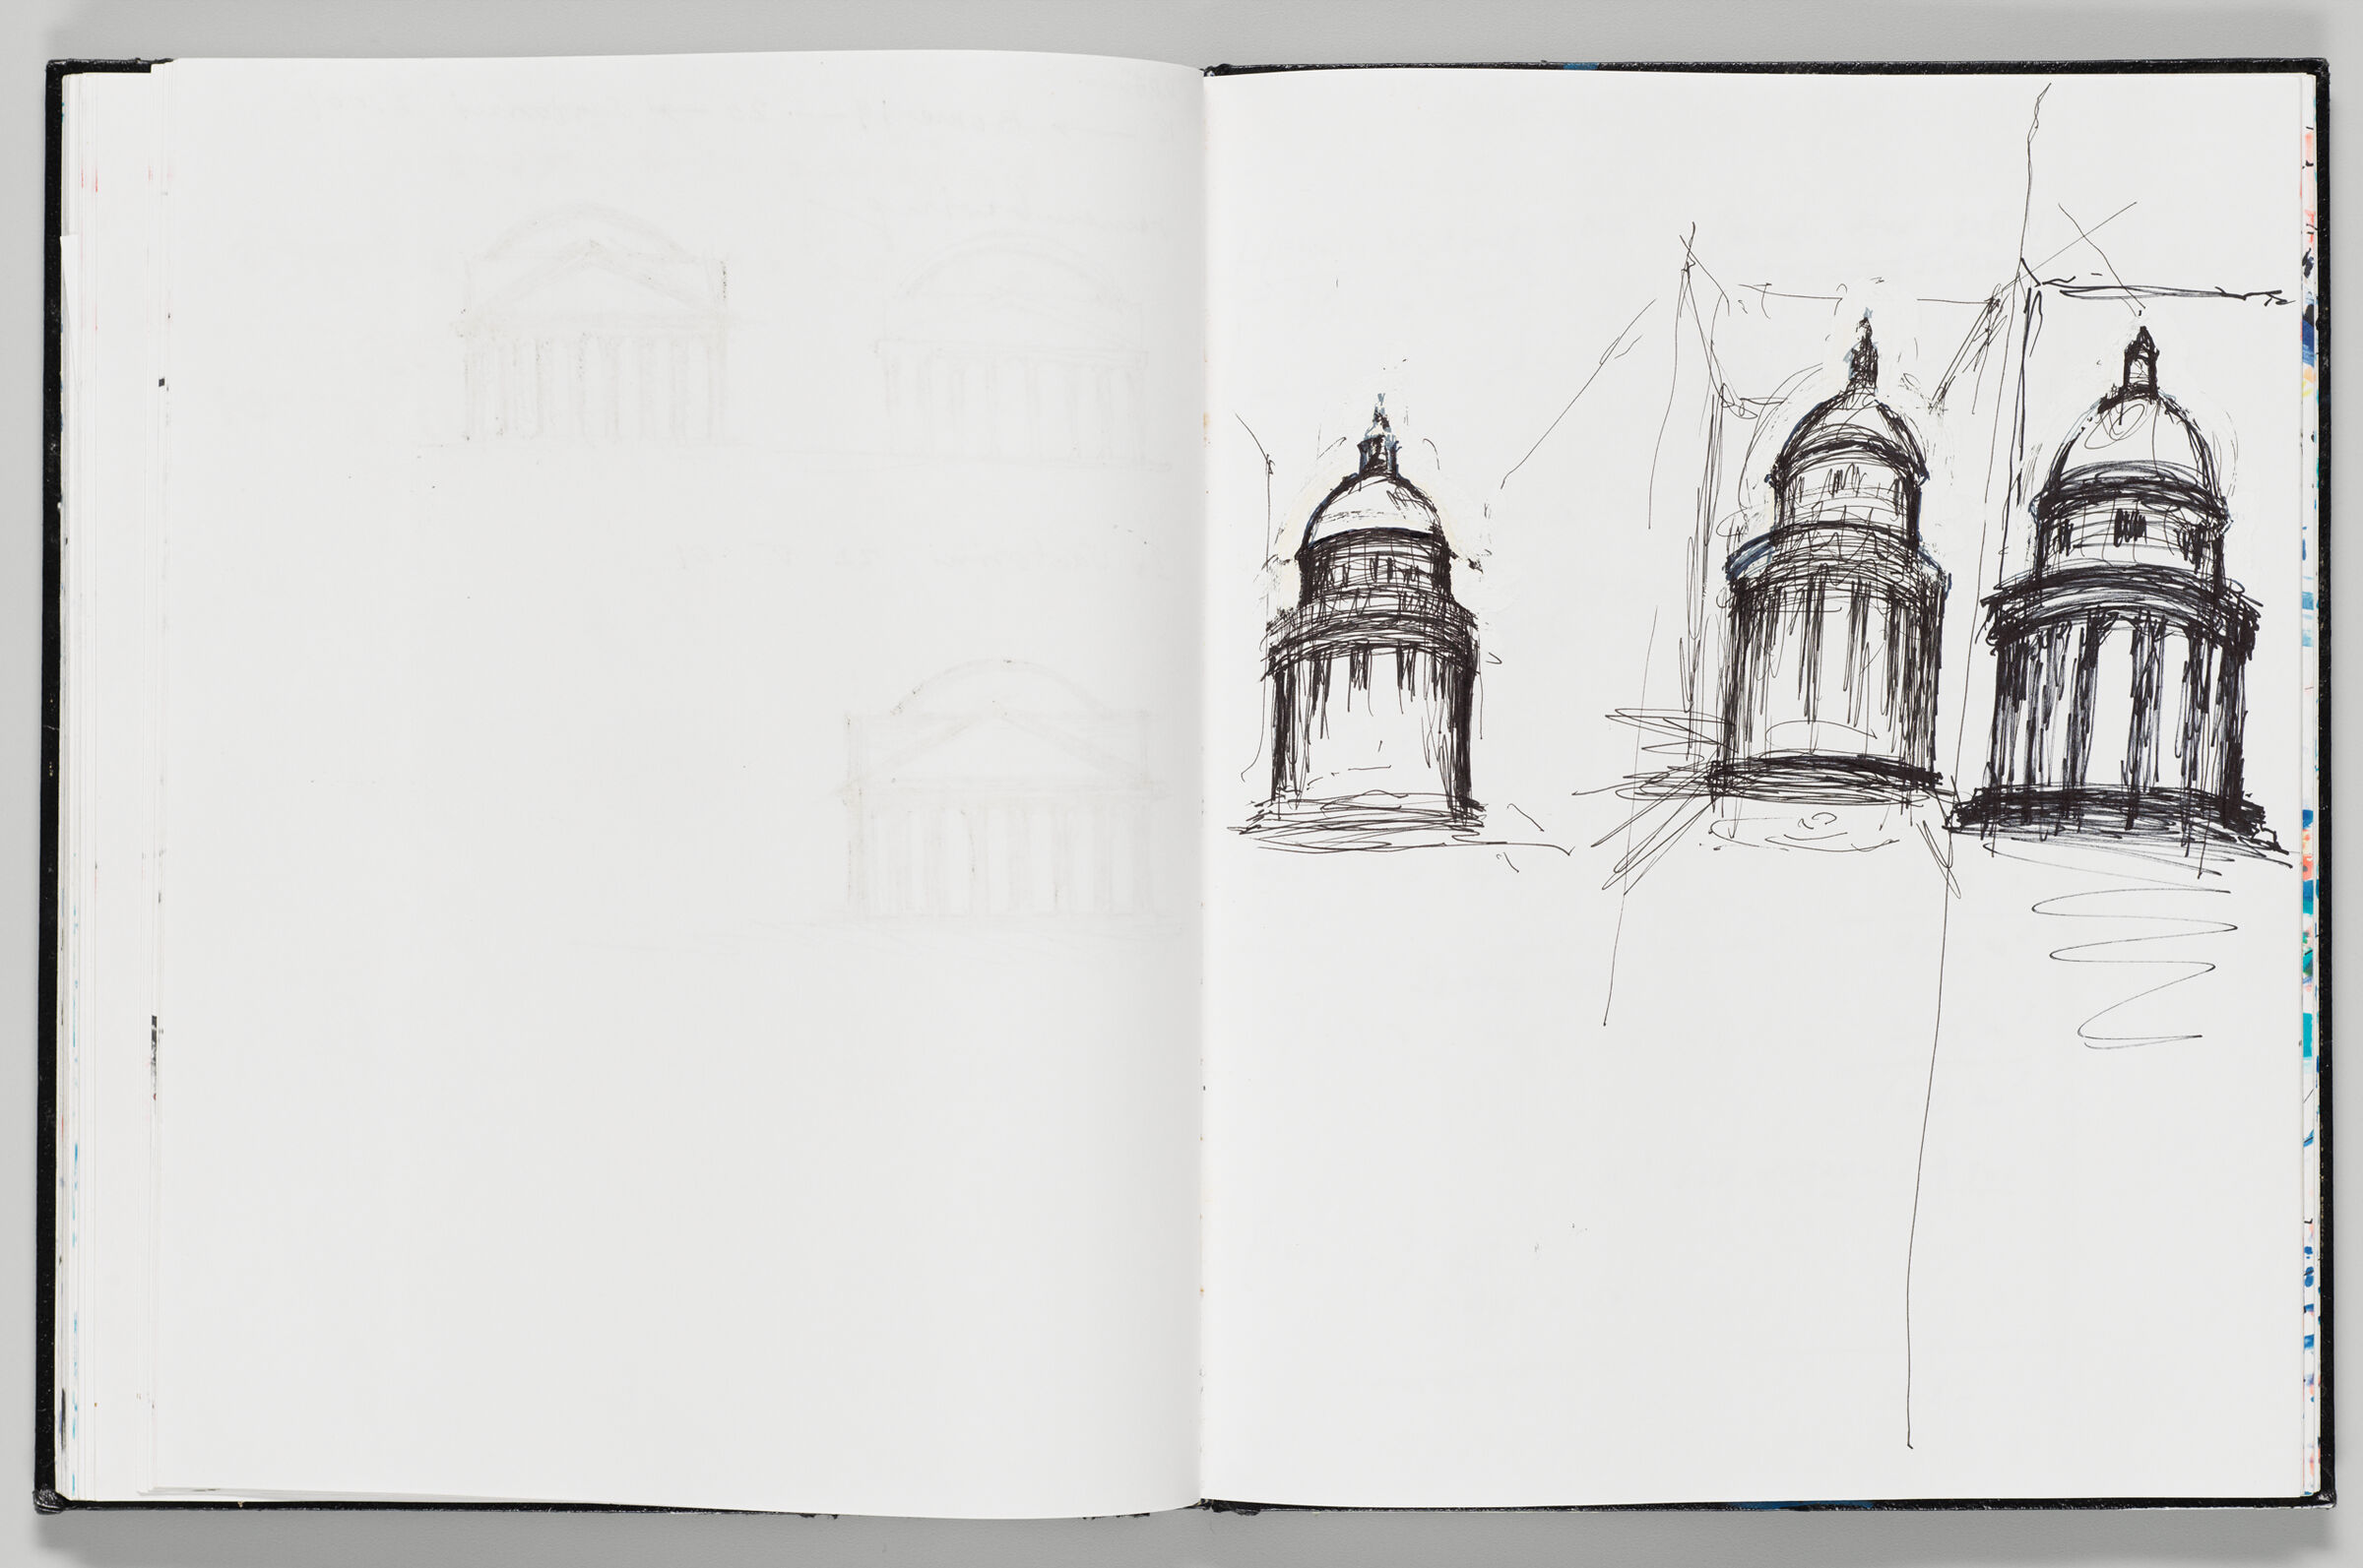 Untitled (Bleed-Through From Previous Page, Left Page); Untitled (Rome Sketches, Right Page)